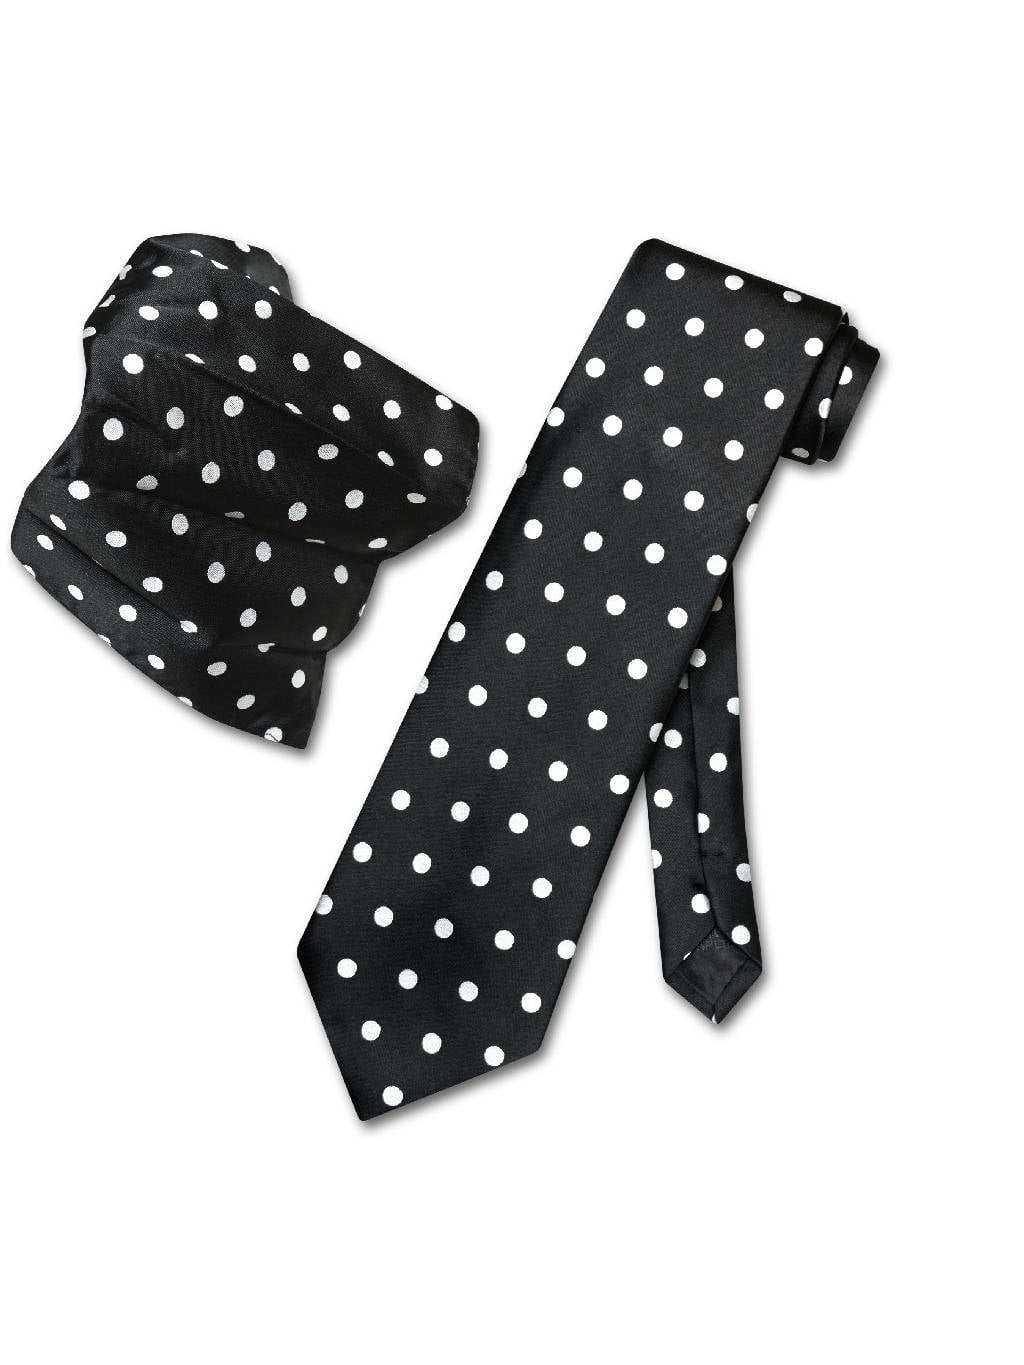 Shyaway on X: Polka dots never go out of style! Make a pointed